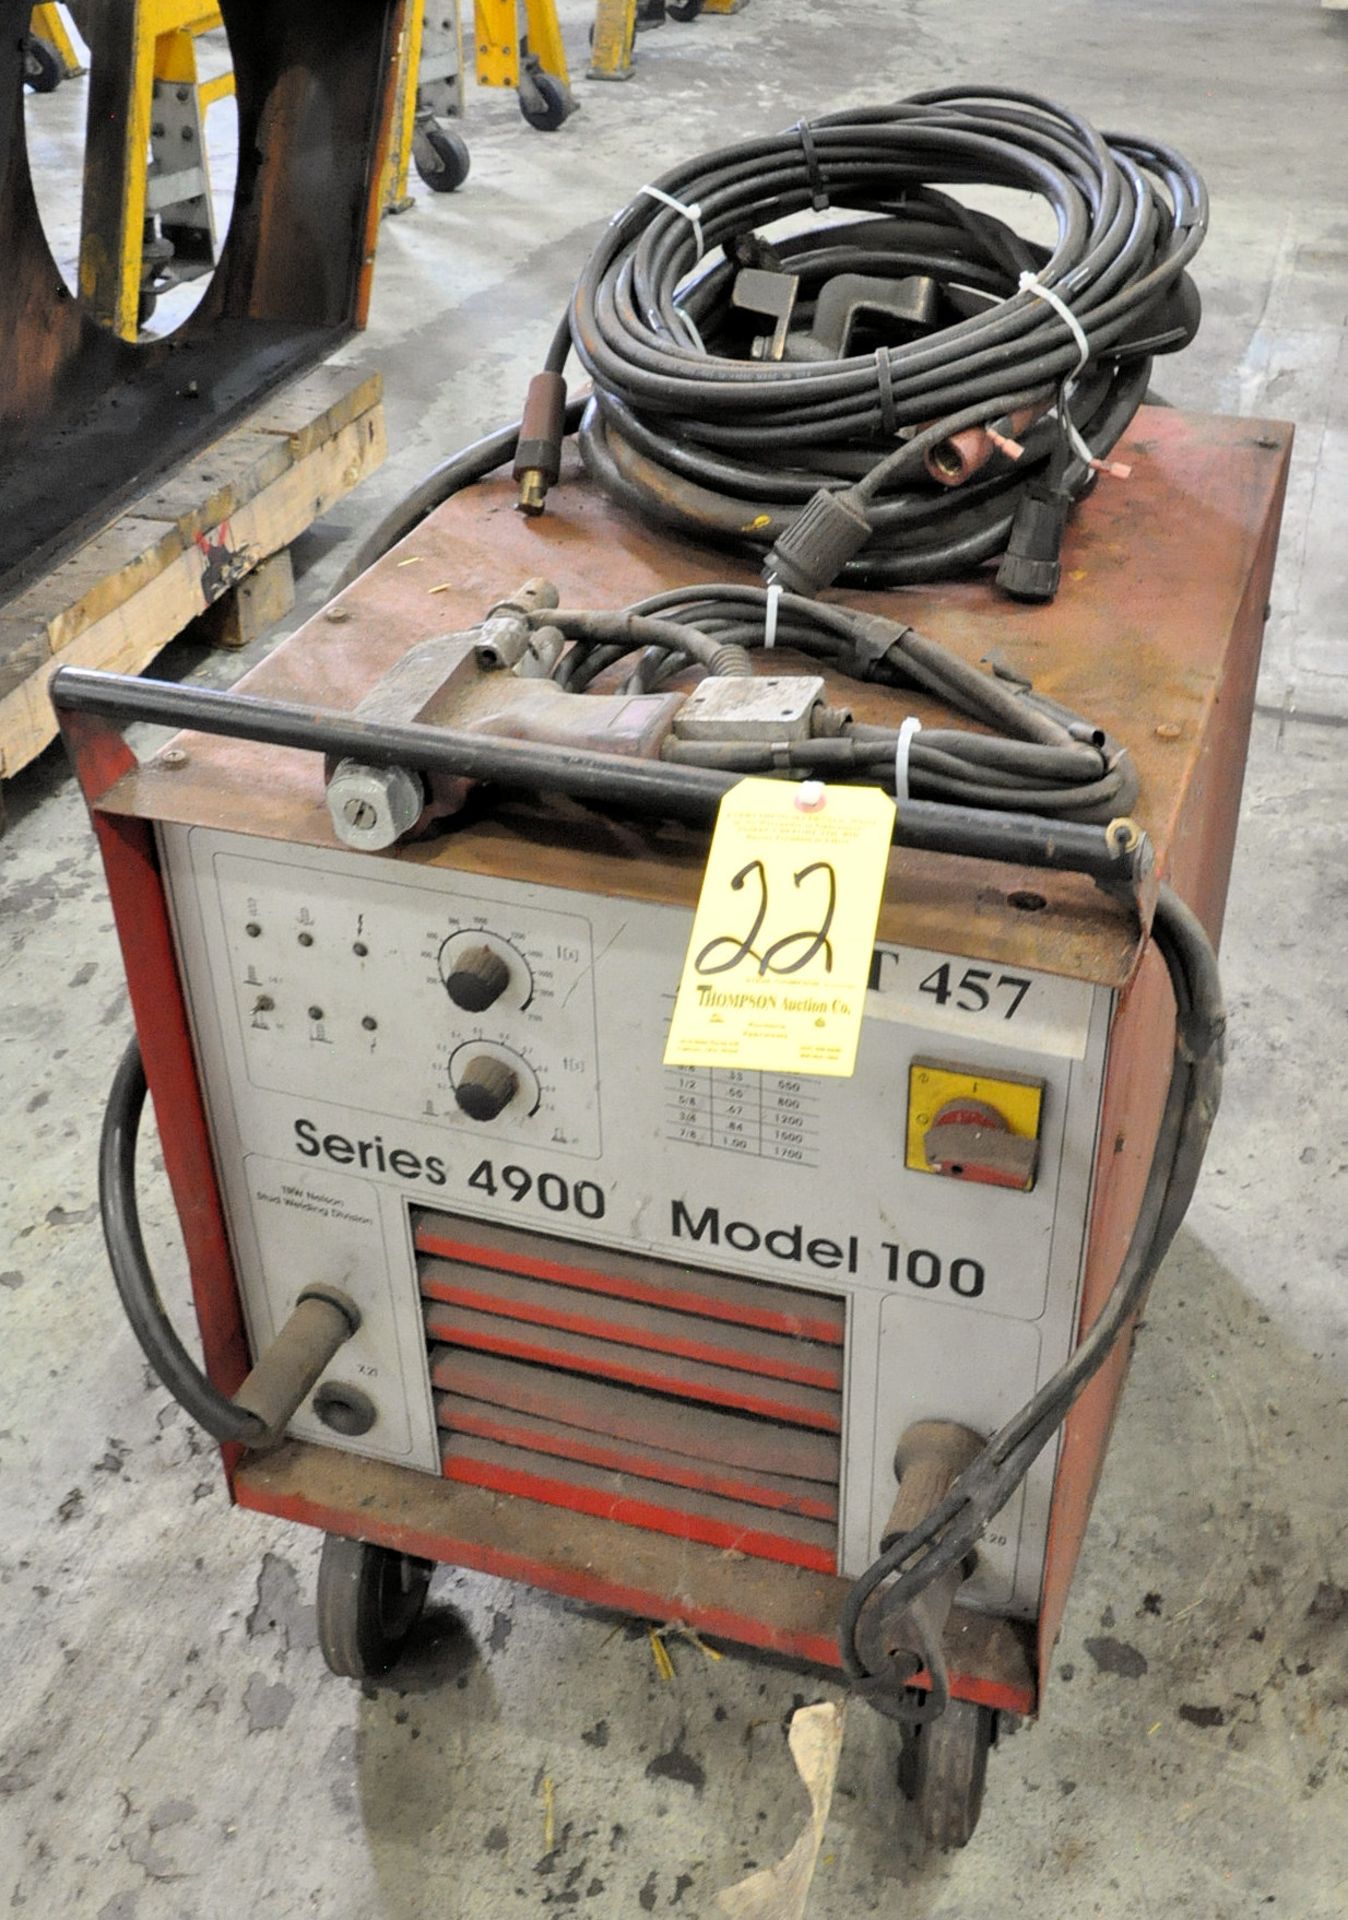 Nelson Series 4900, Model 100, Stud Welder, S/n 040264, with Gun and Leads, Portable